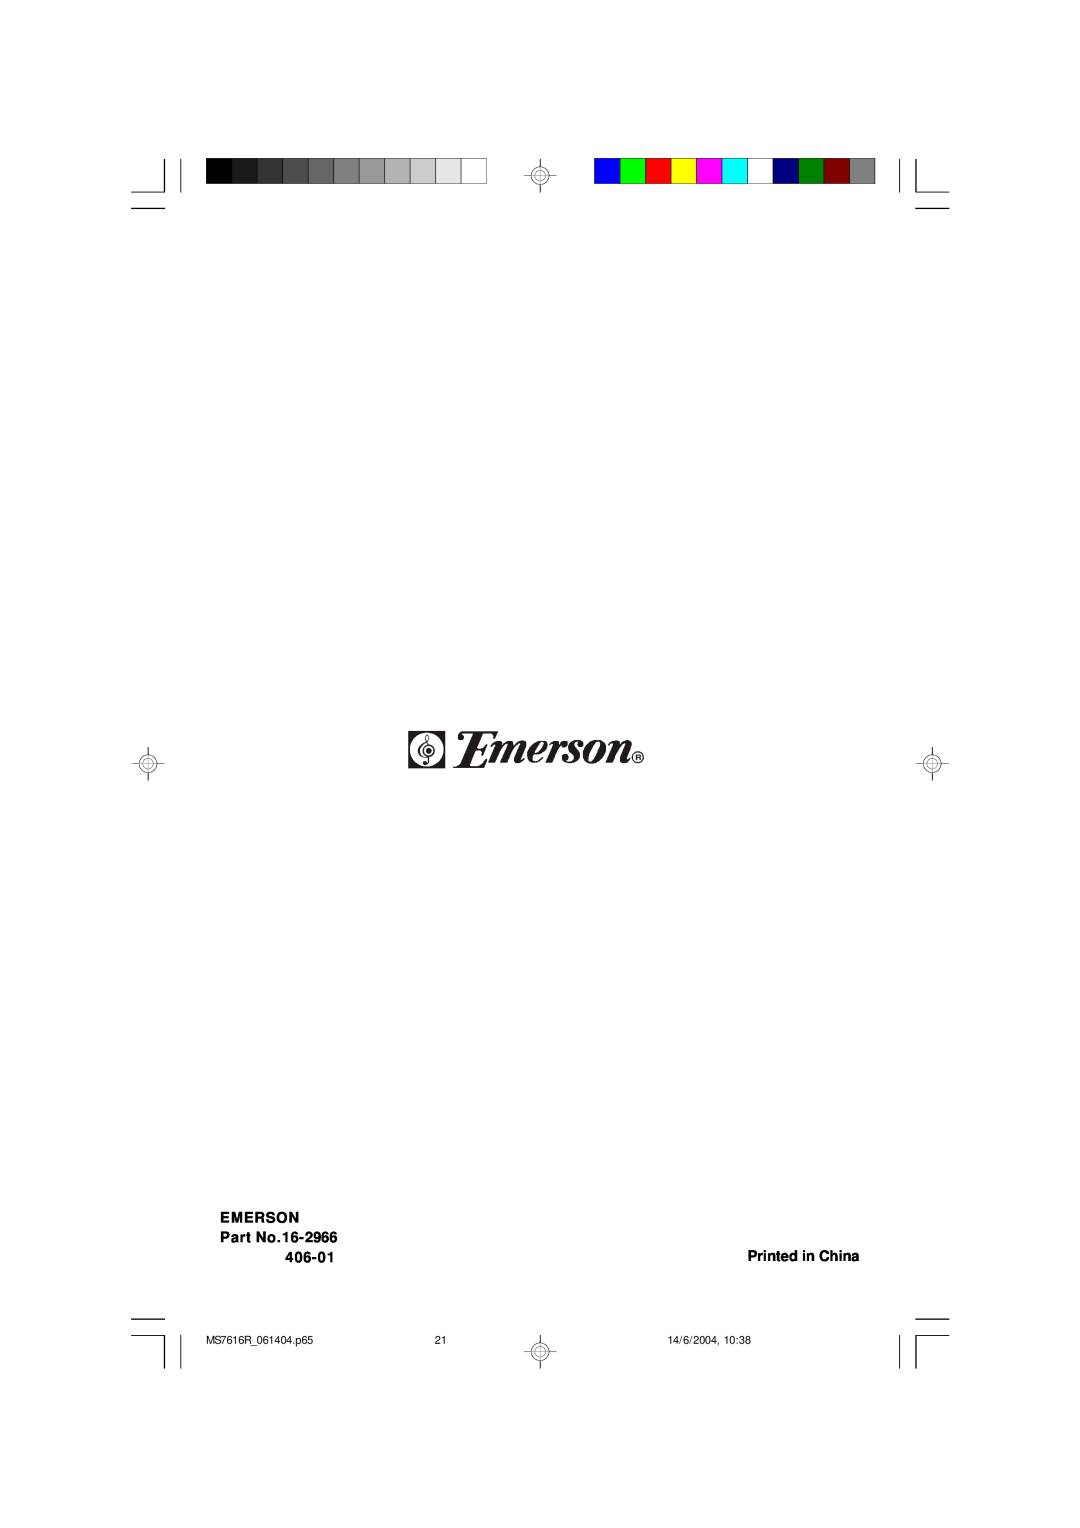 Emerson owner manual Emerson, Part No.16-2966, 406-01, MS7616R 061404.p65, 14/6/2004 